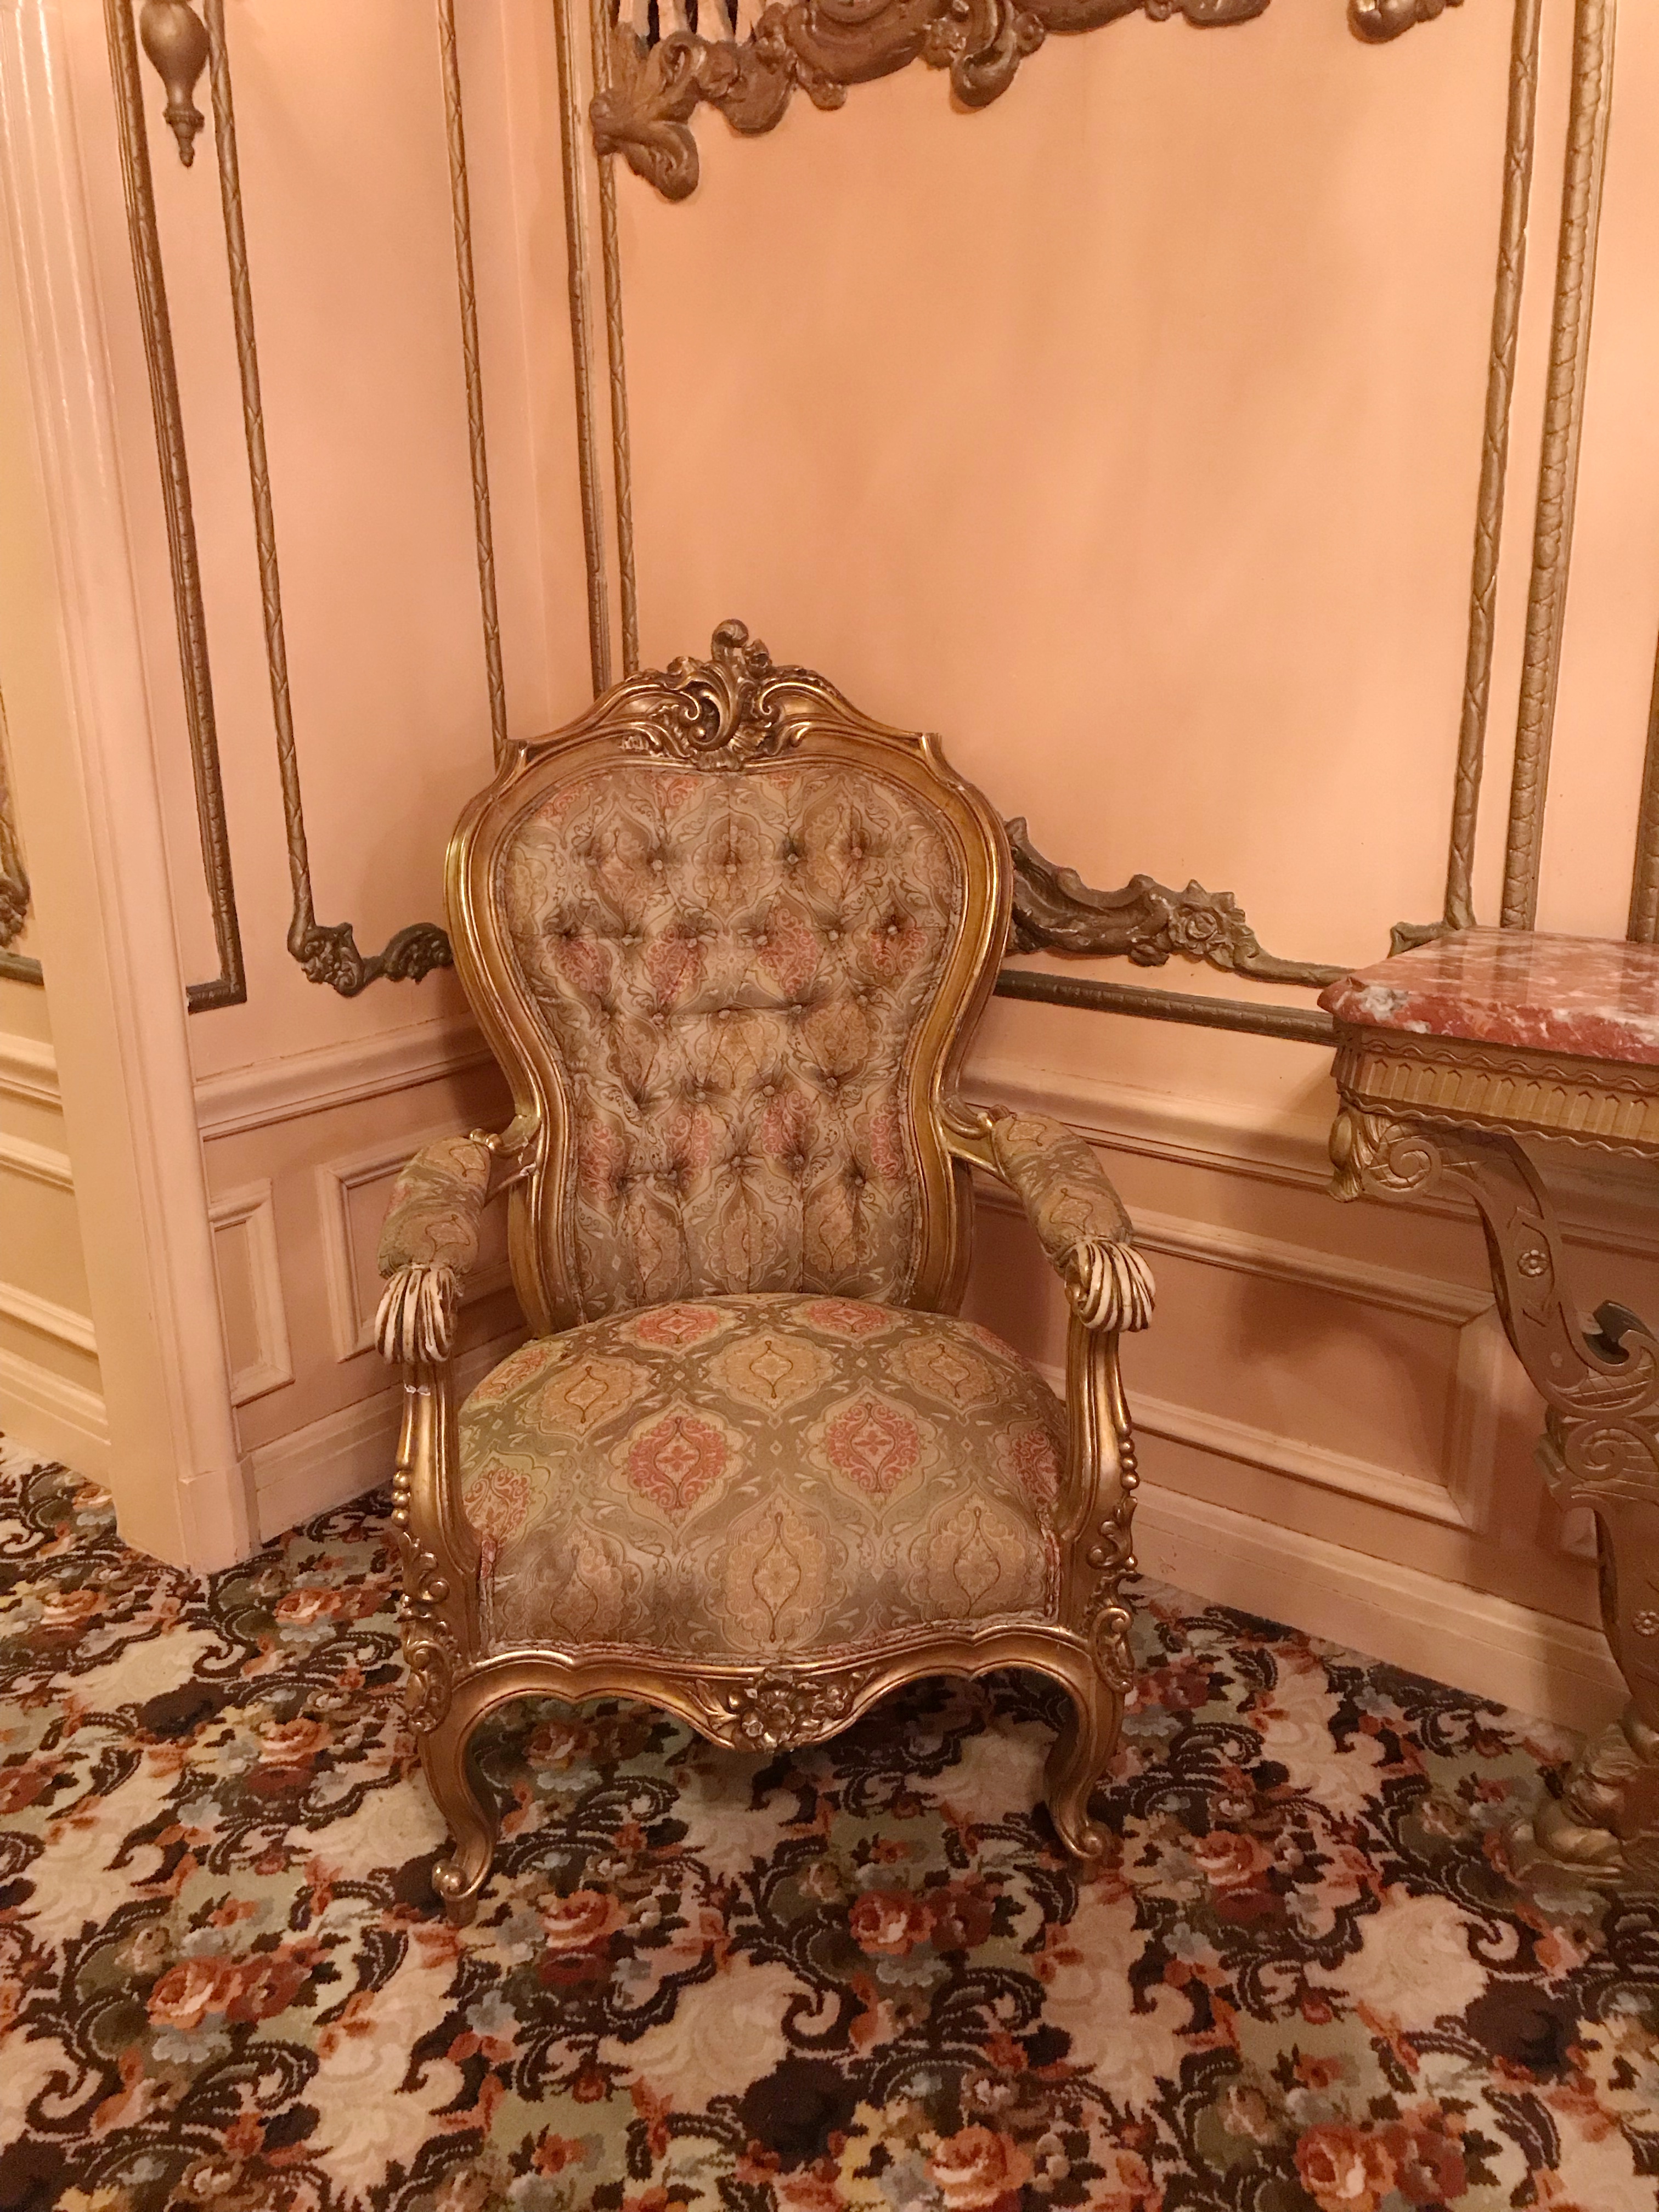 Vintage chair and floral carpet at the St. Louis Fox Theatre.